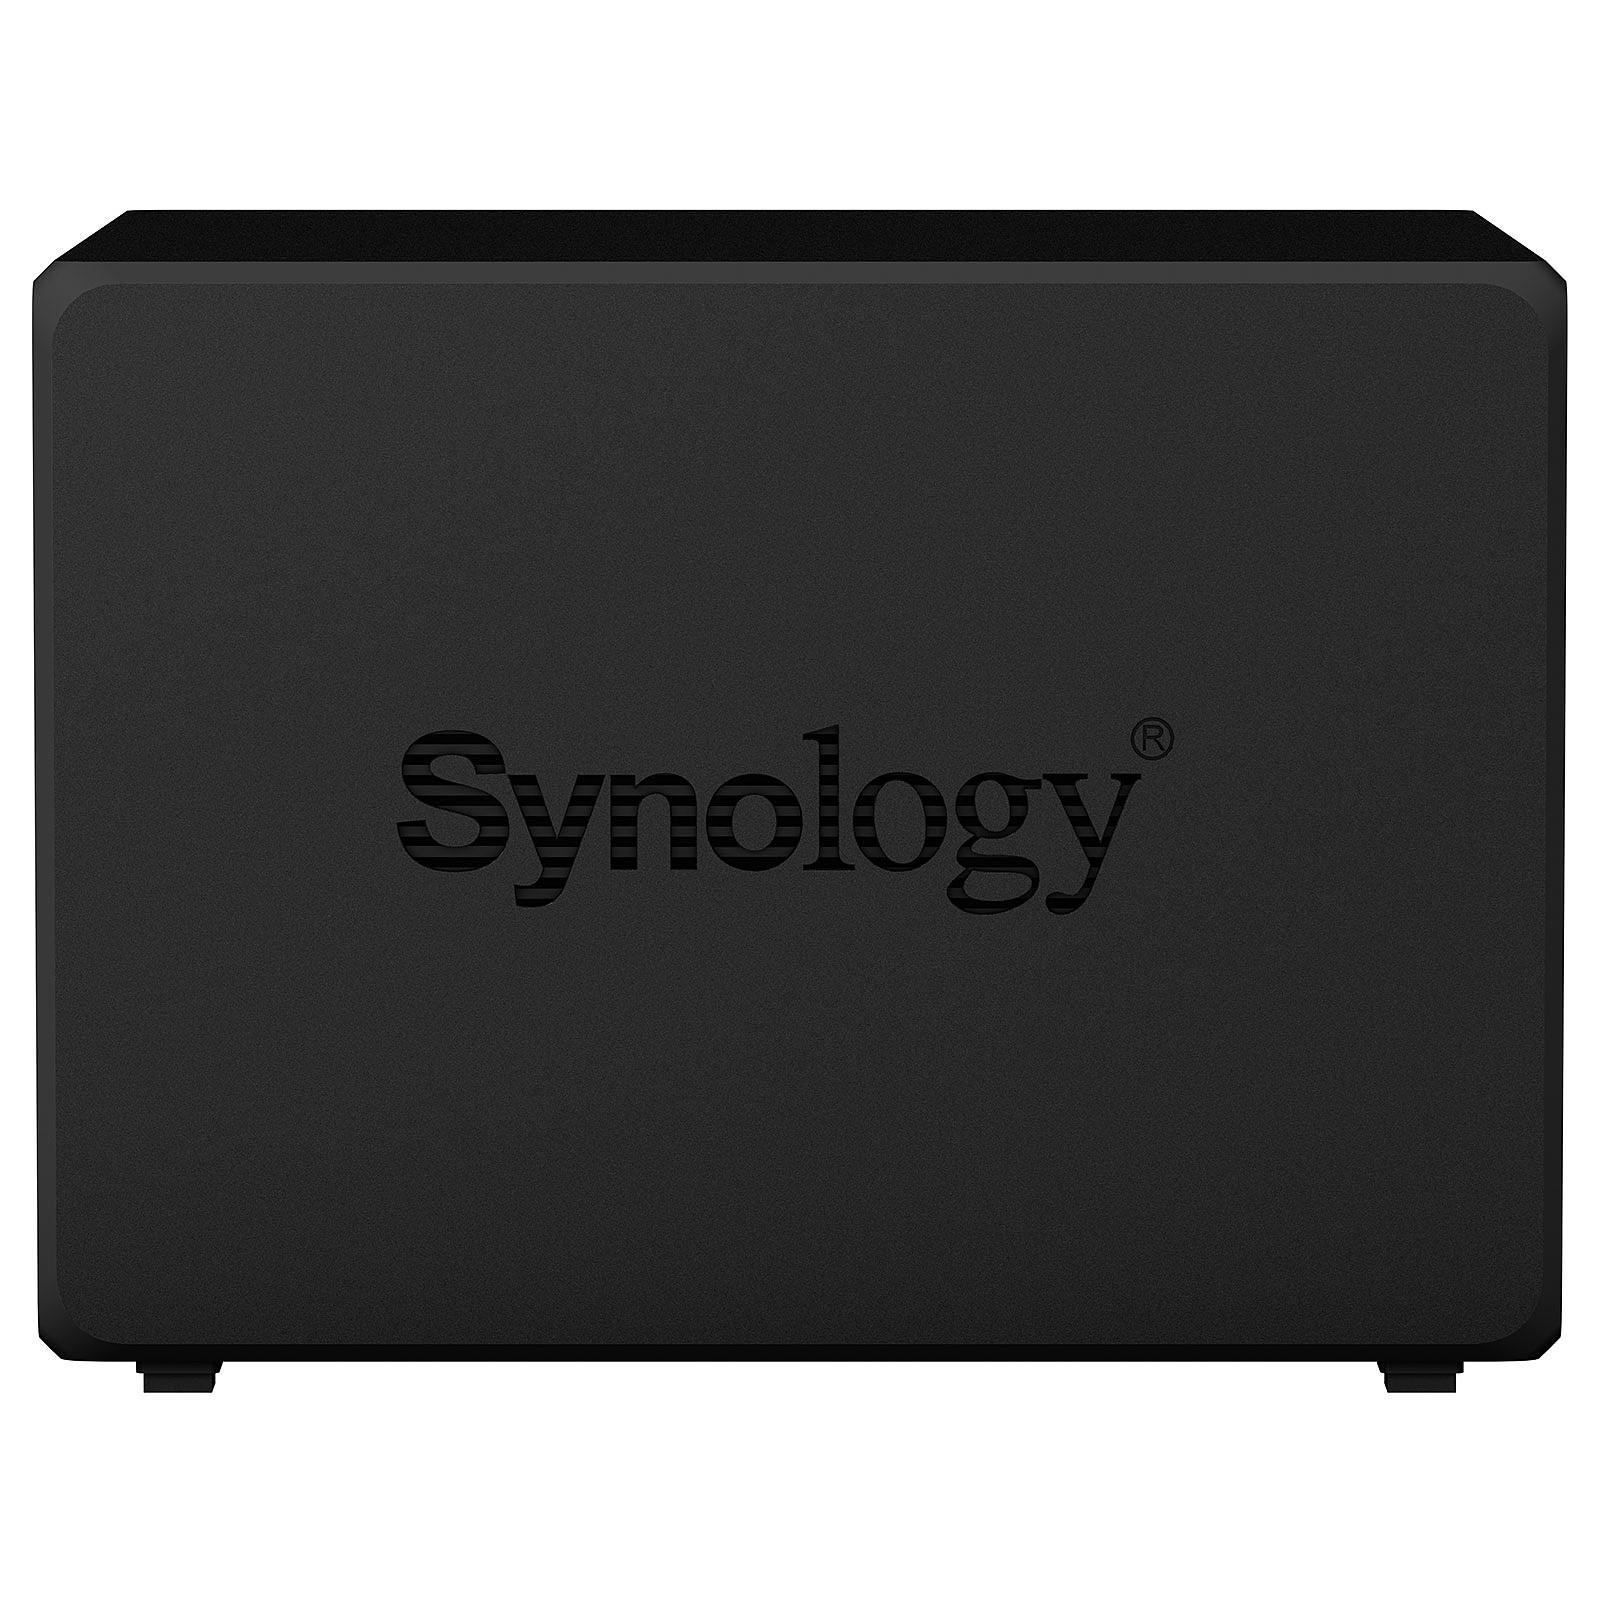 SYNOLOGY DS920+ 4BAY/QC 2.0GHz